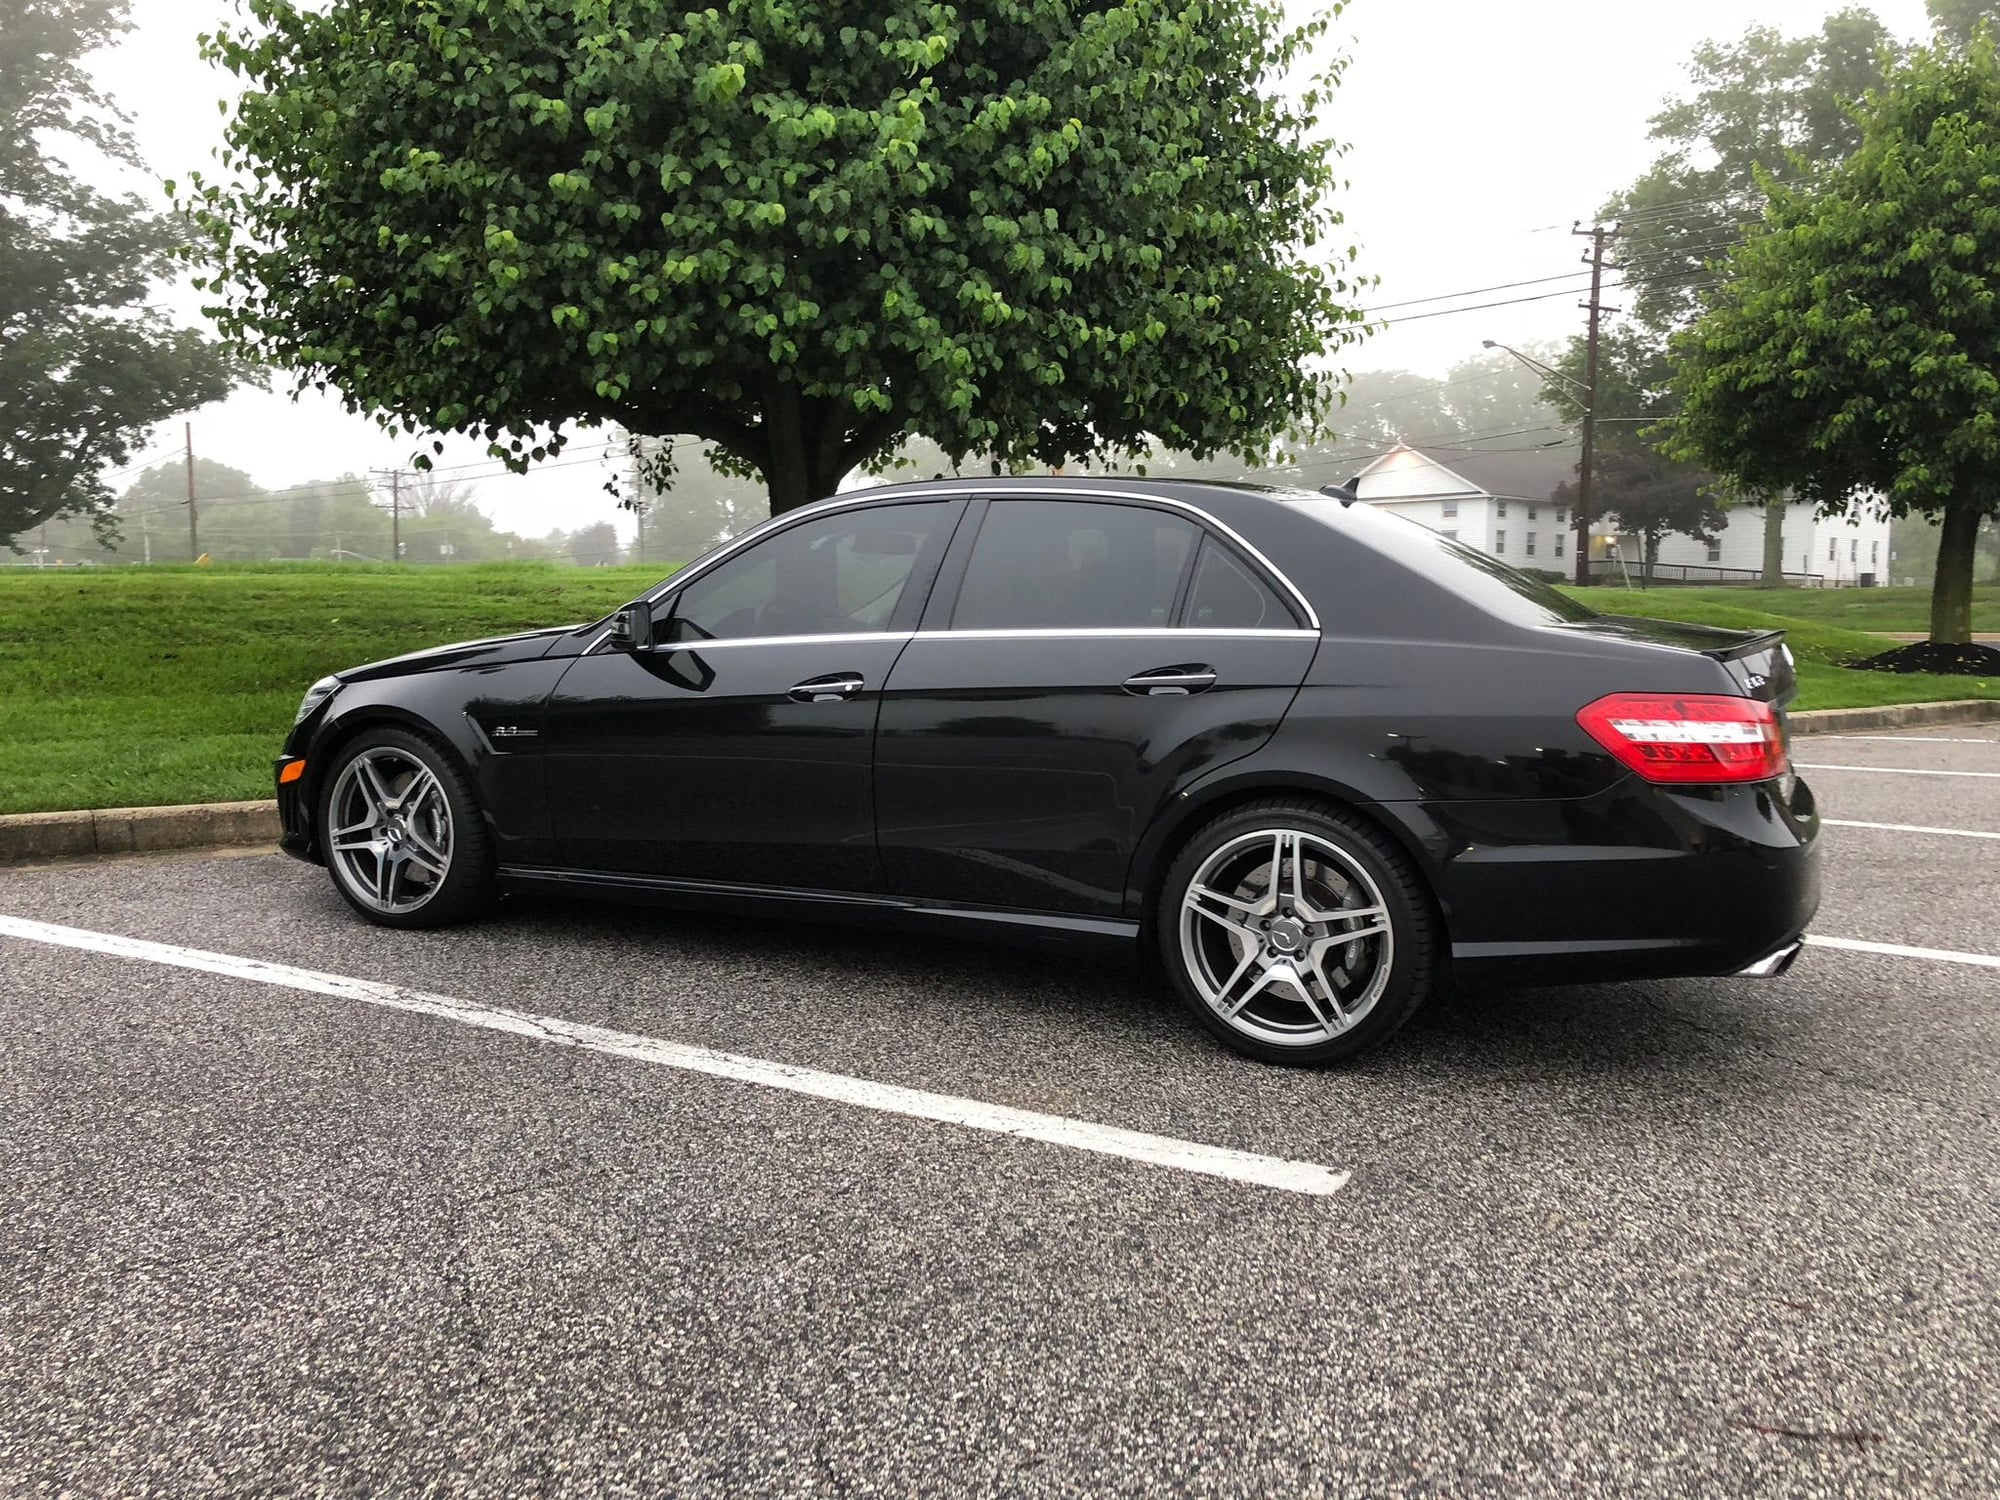 2010 E63 adult owned, responsibly driven